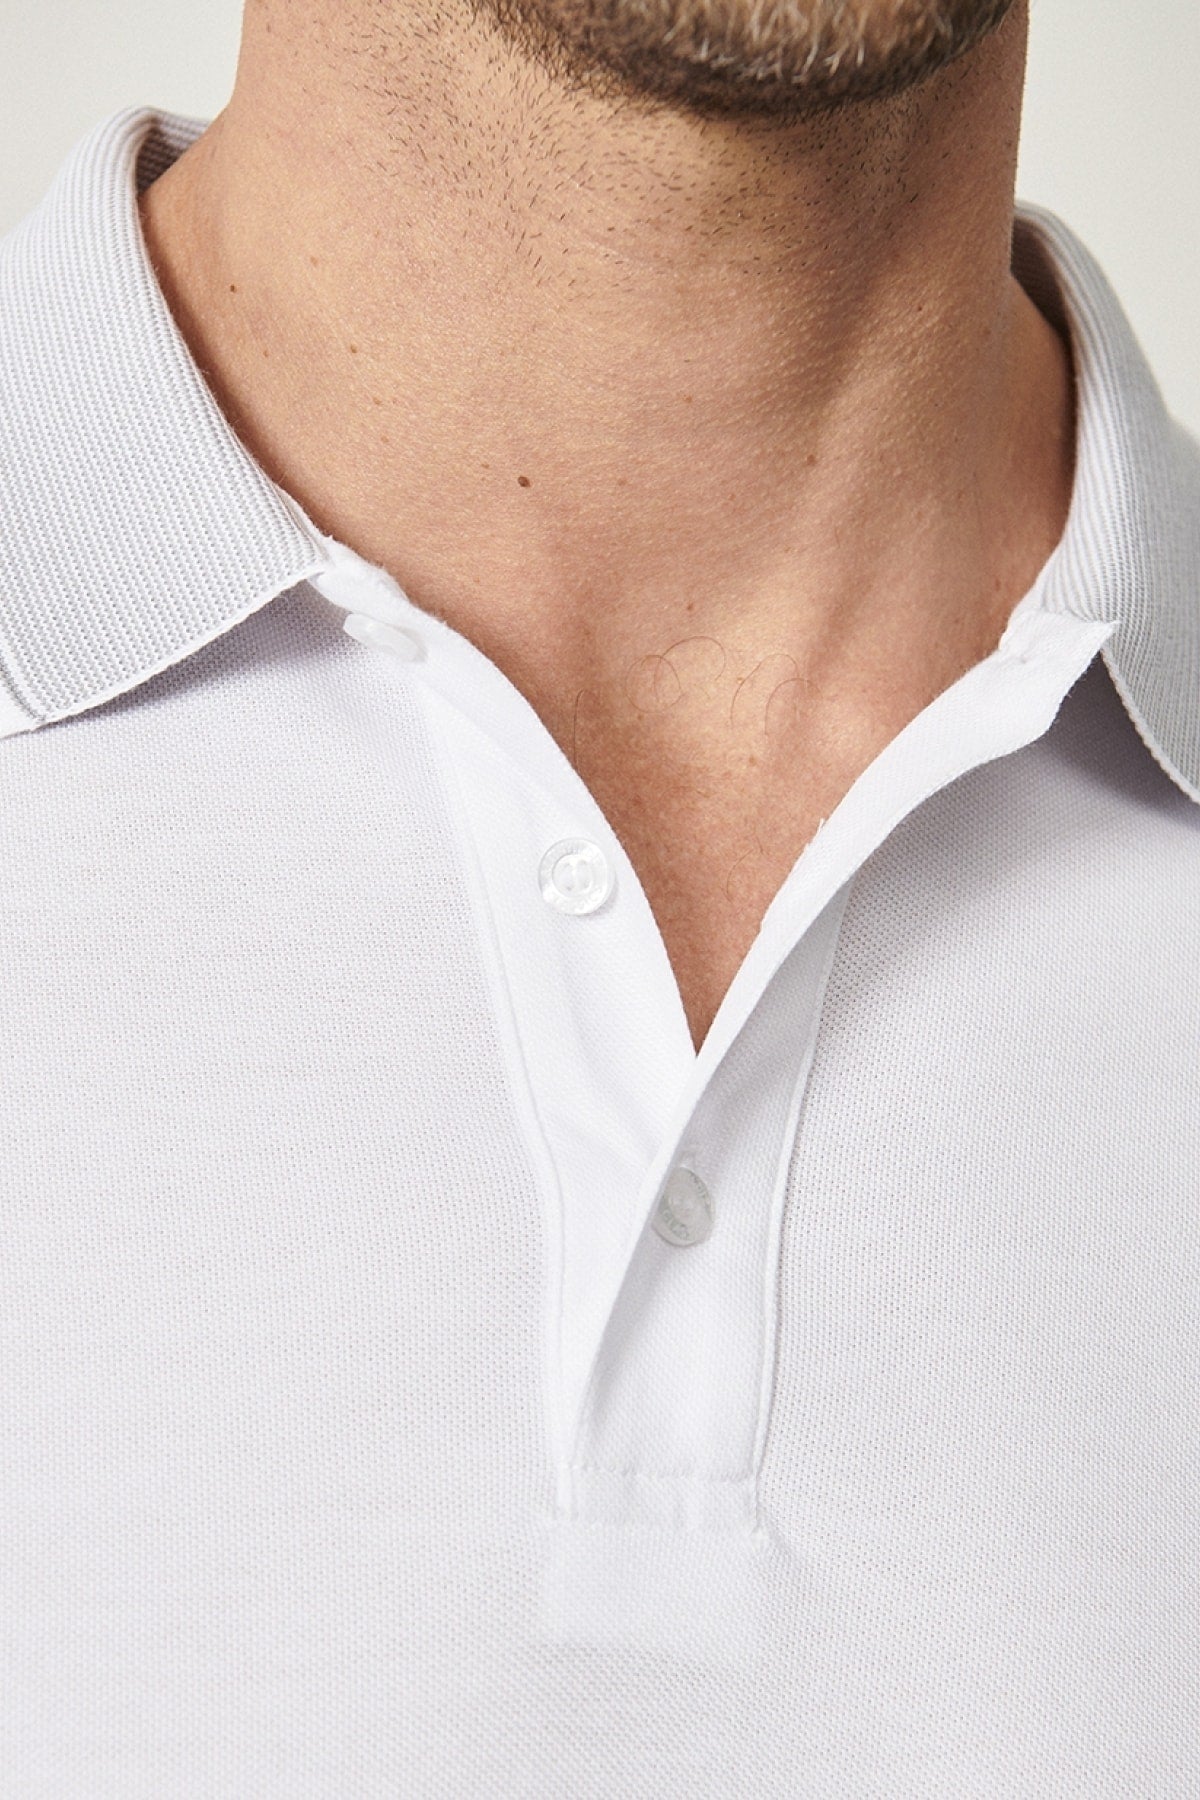 Men's Non-Shrink Cotton Fabric Slim Fit Slim Fit White Roll-Up Polo Neck T-Shirt